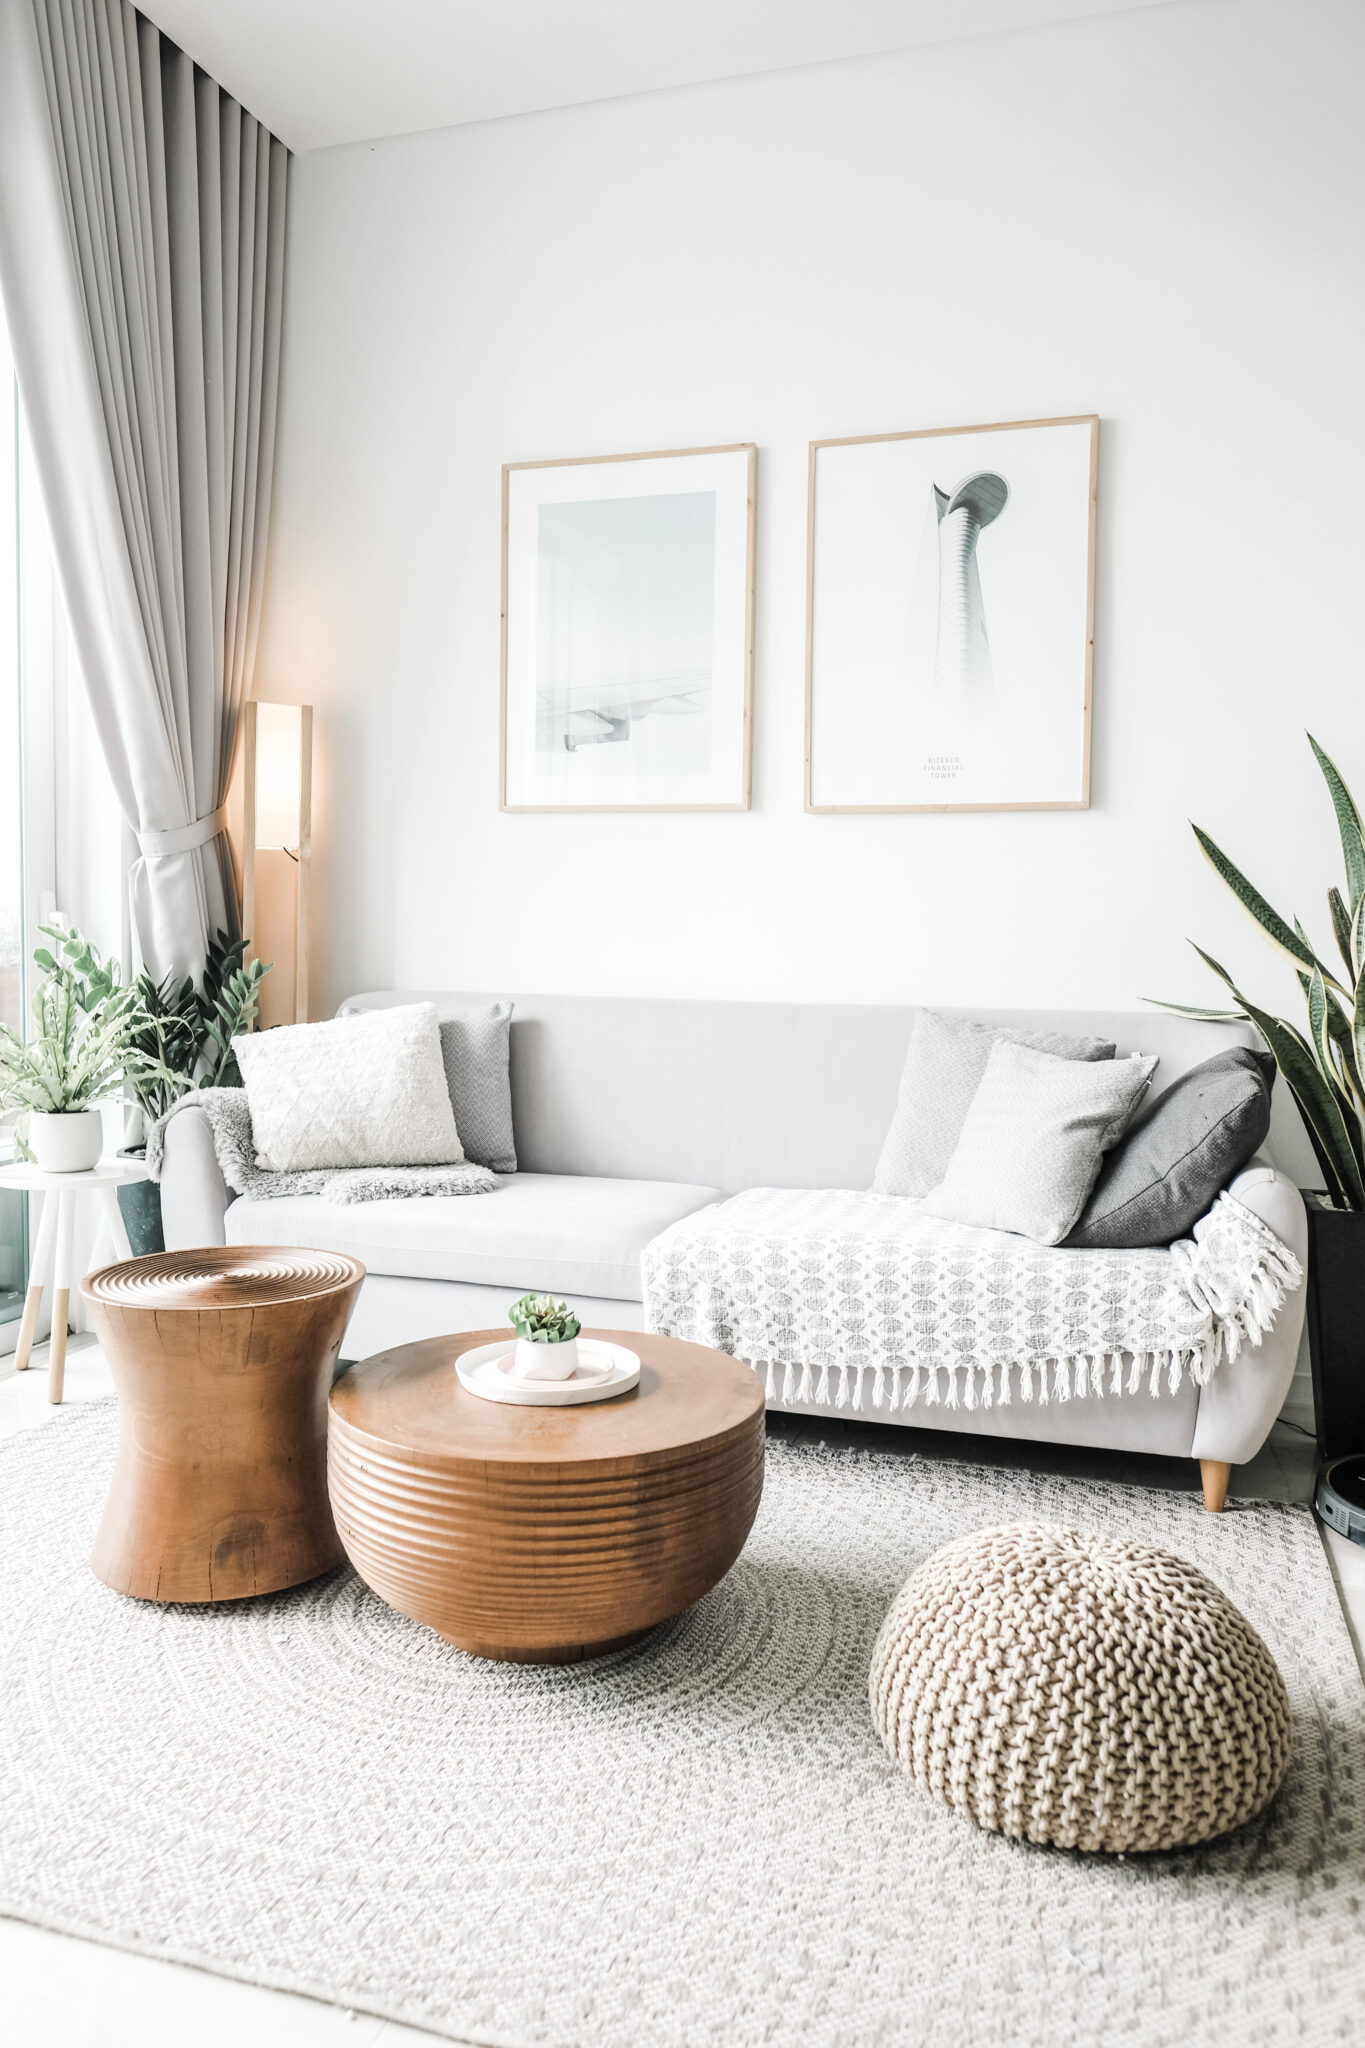 A beautiful neutral living room is shown, this article covers how to make a small living room feel spacious.